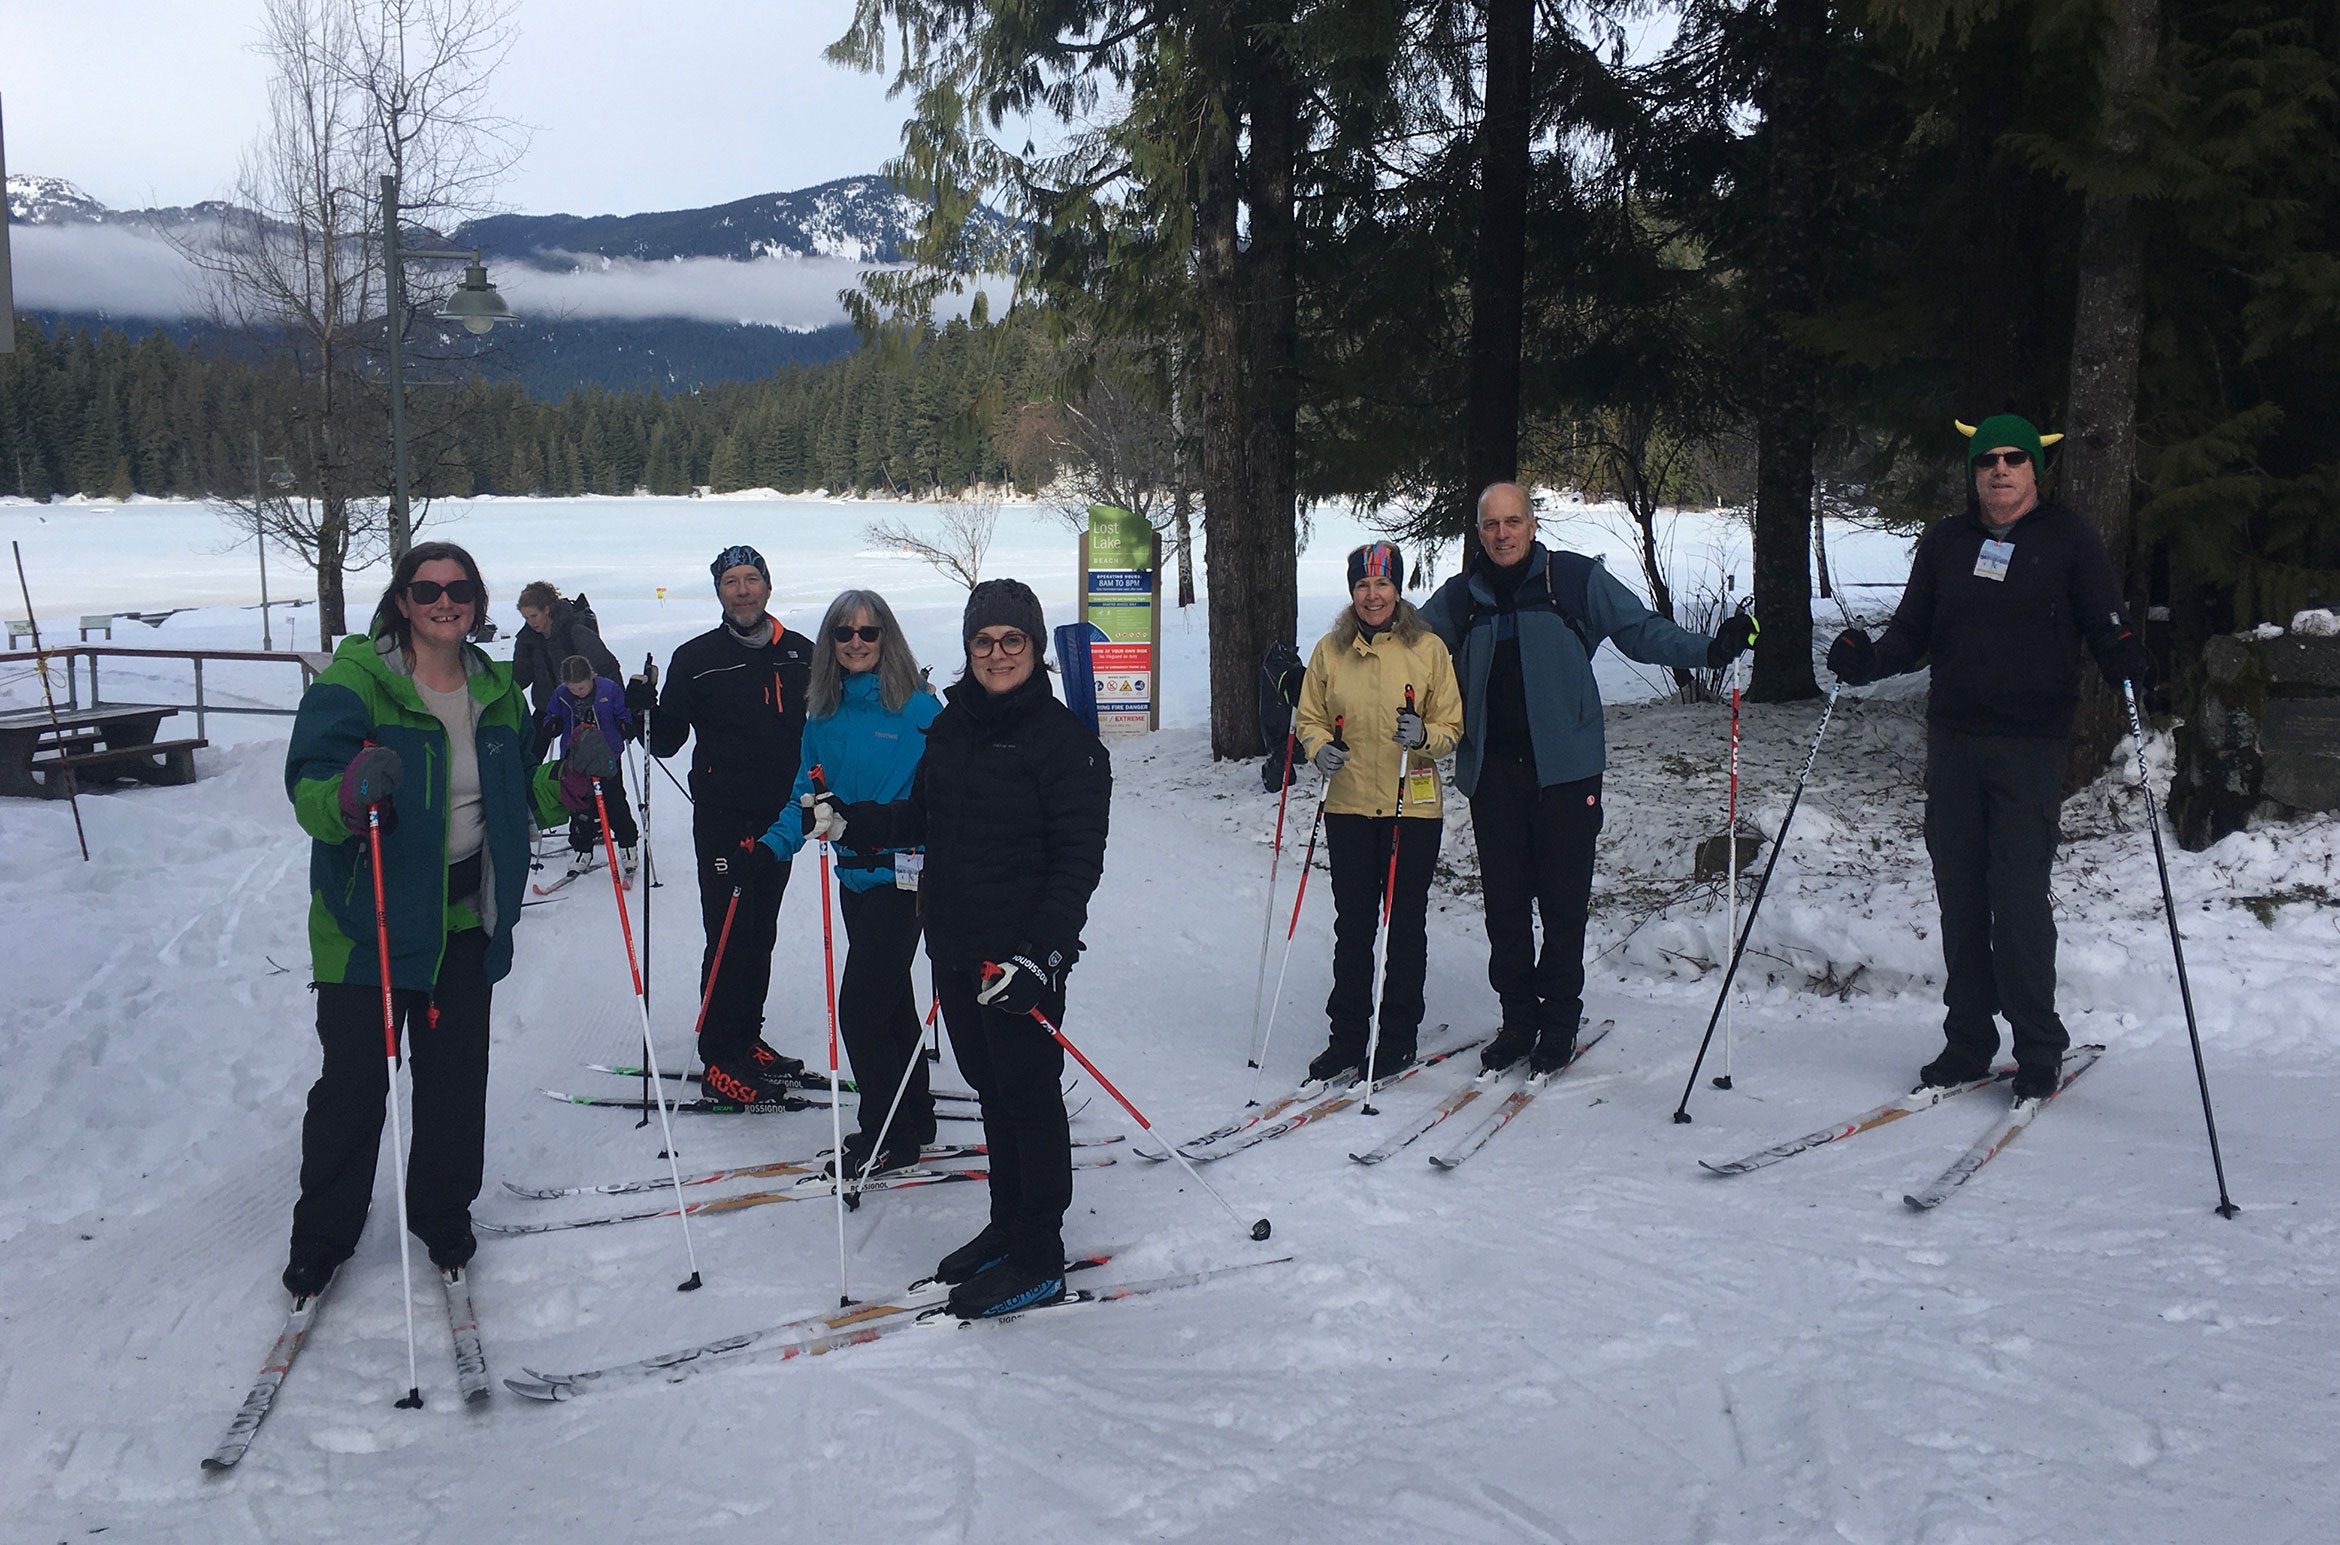 A group shot of Kate's cross-country ski group at Lost Lake in Whistler.